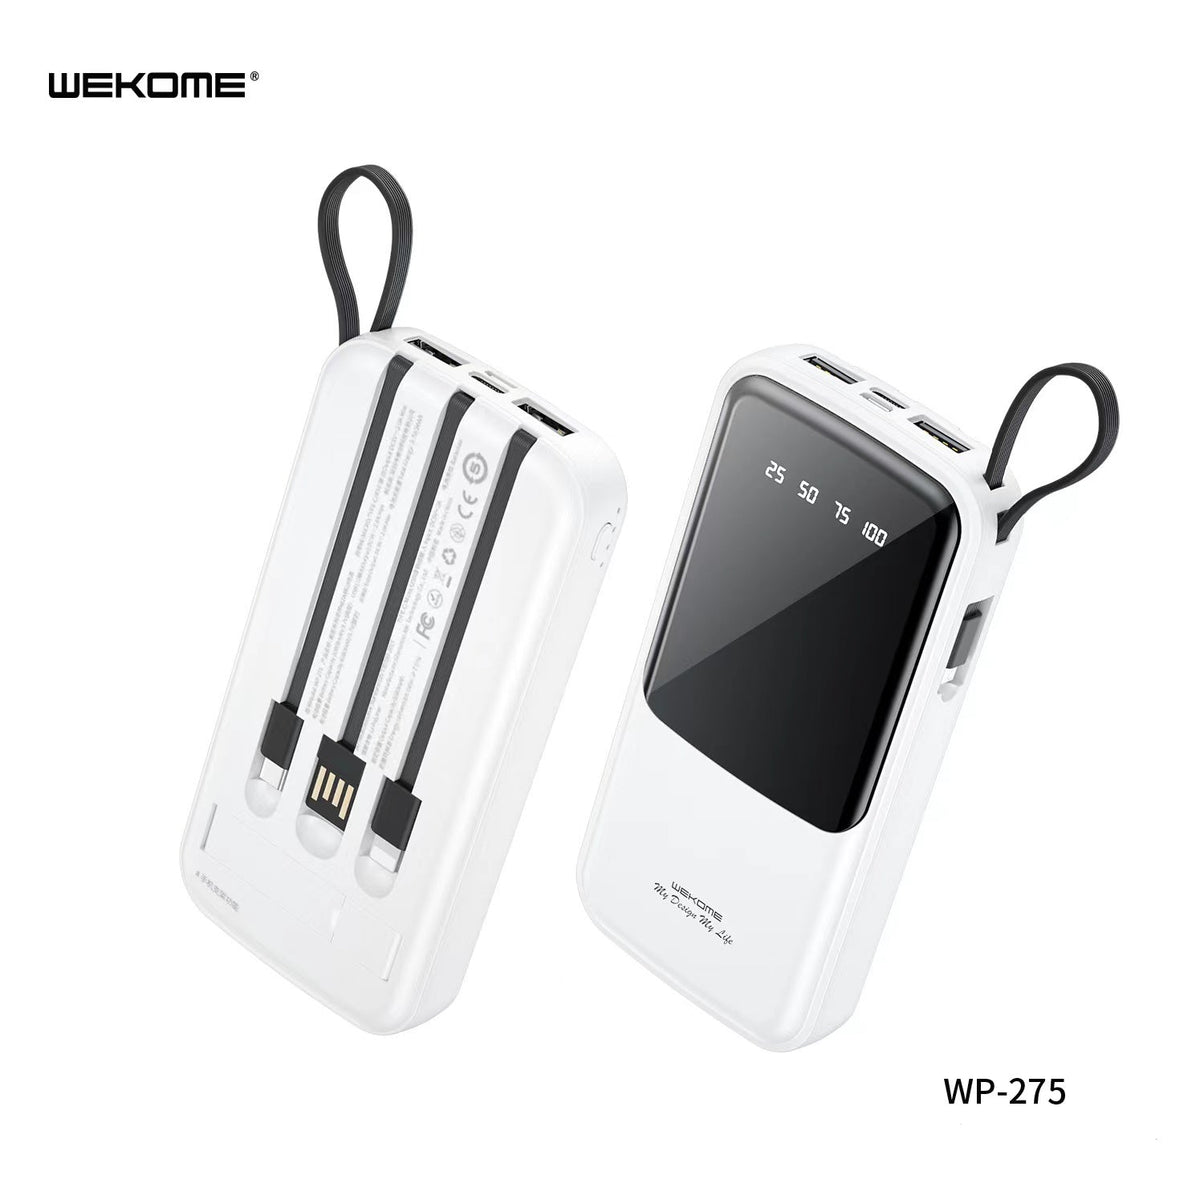 WEKOME WP-275 10000MAH GONEN SERIES POWER BANK WITH 4 CABLES & PHONE HOLDER - White